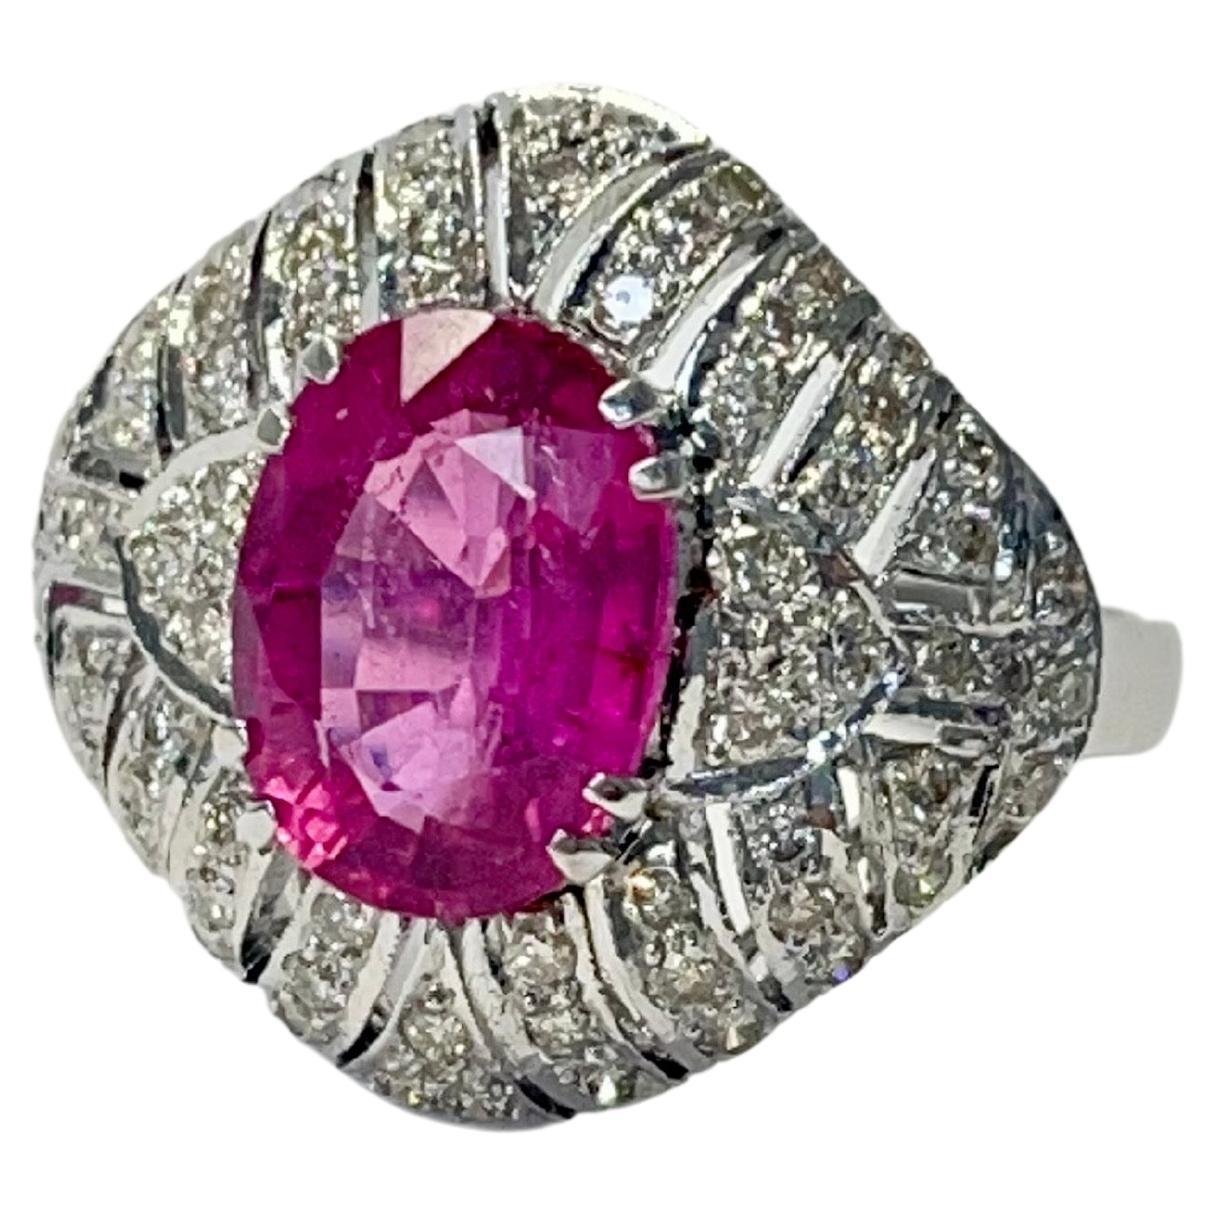 1920 Art Deco Diamond and Oval Rubellite Engagement Ring in 18K White Gold For Sale